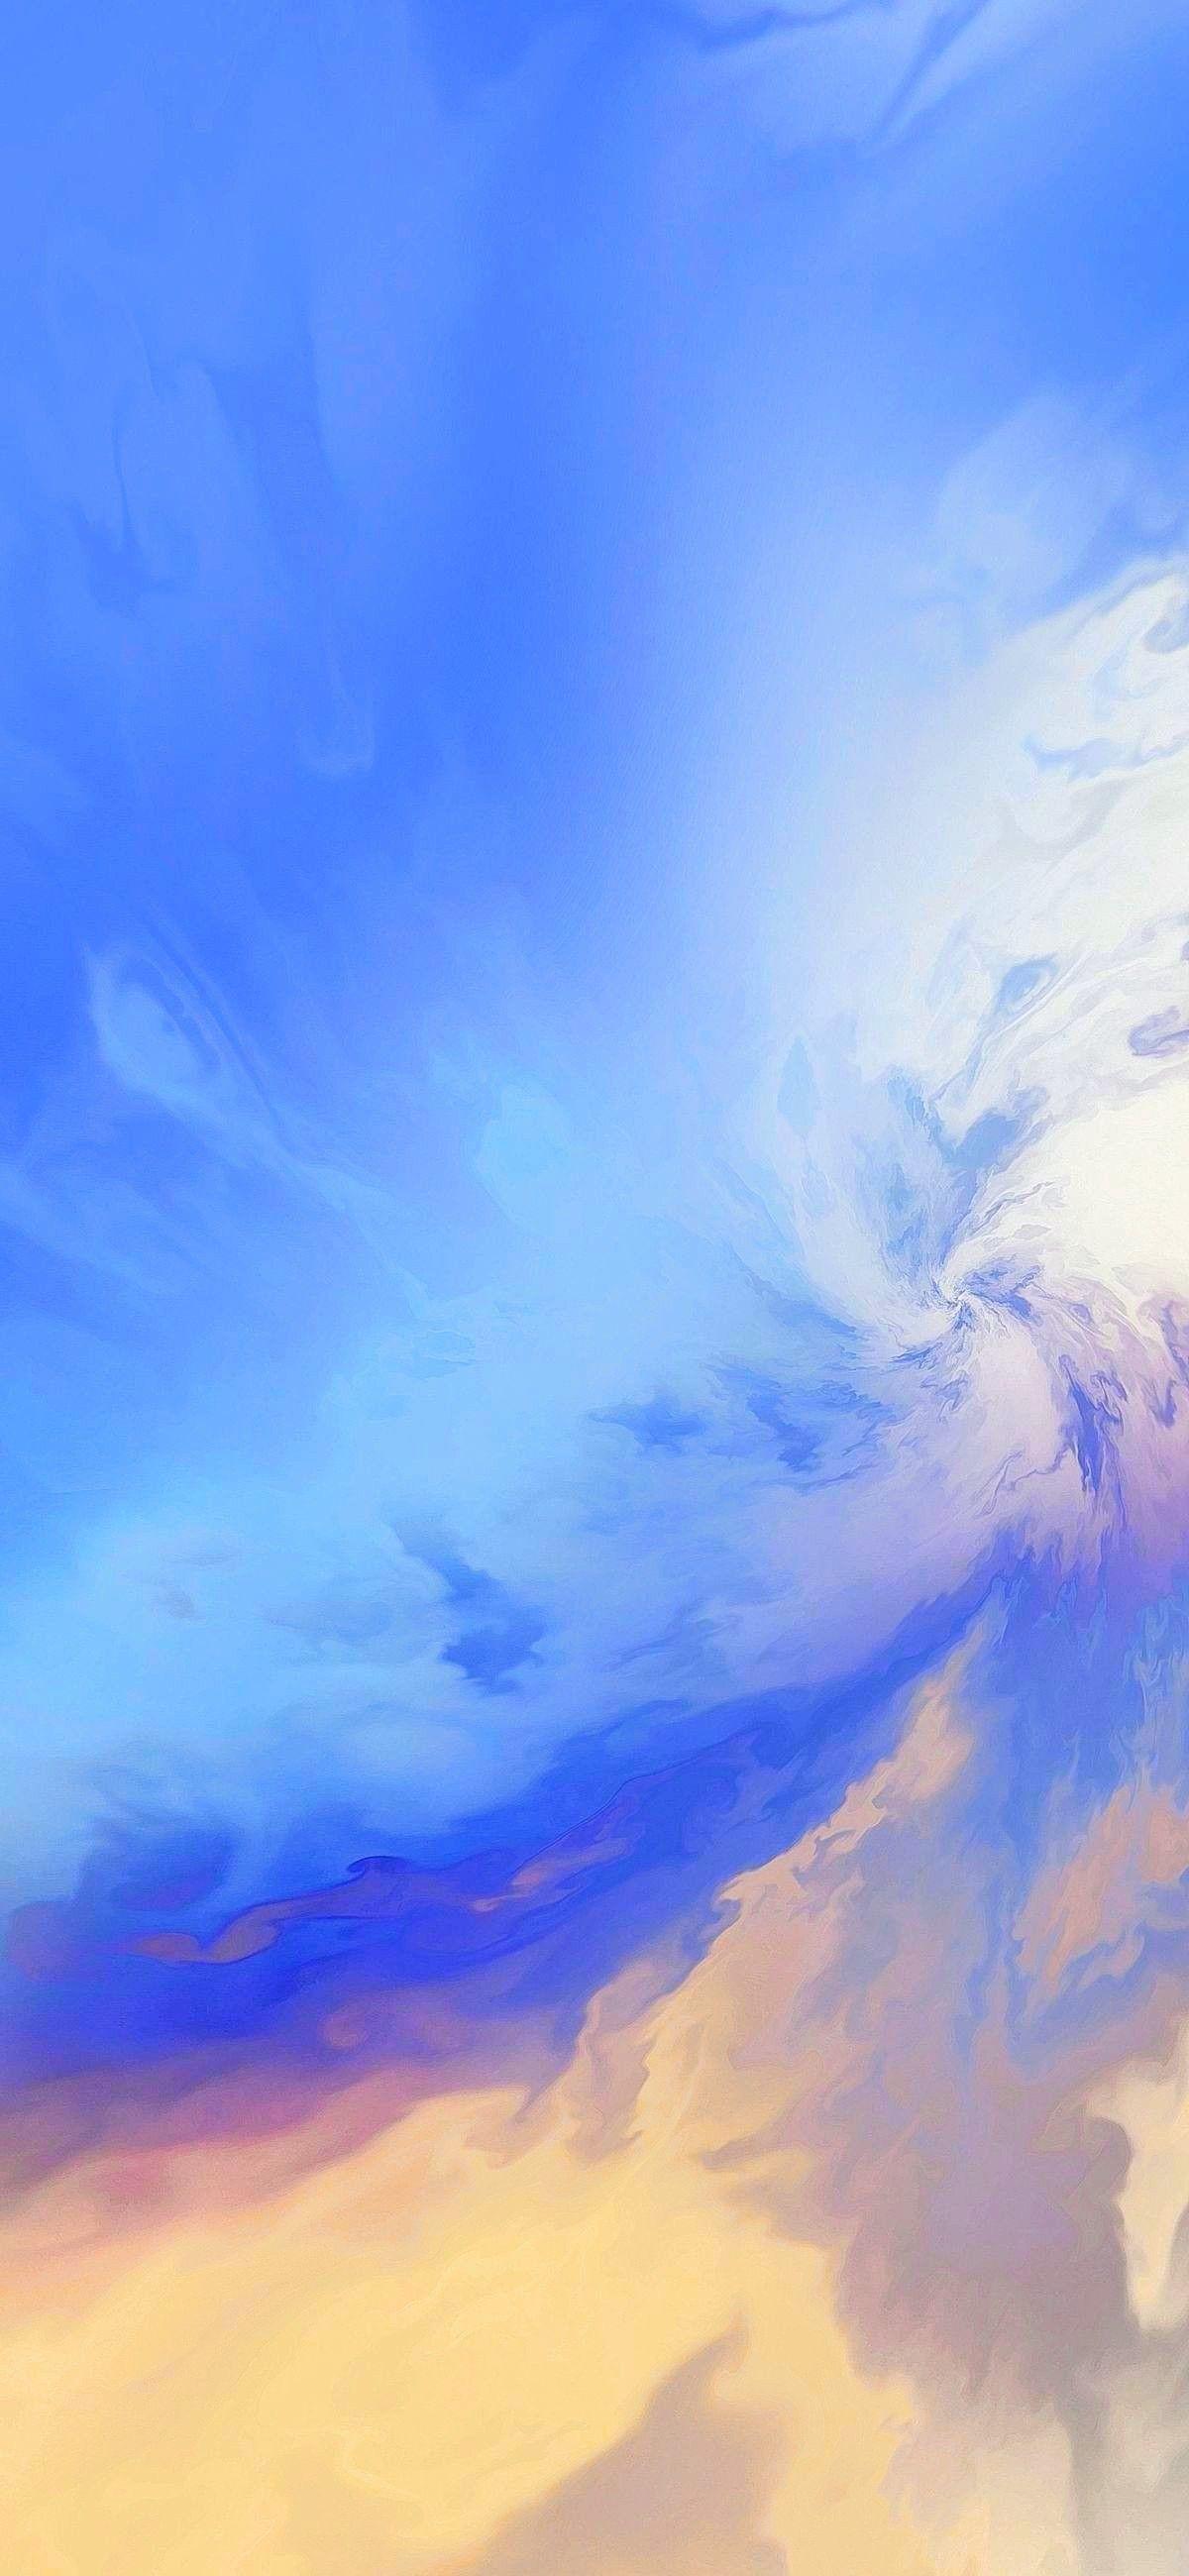 1200 x 2600 · jpeg - iOS Wallpapers are added. See best ios wallpapers along with android ...